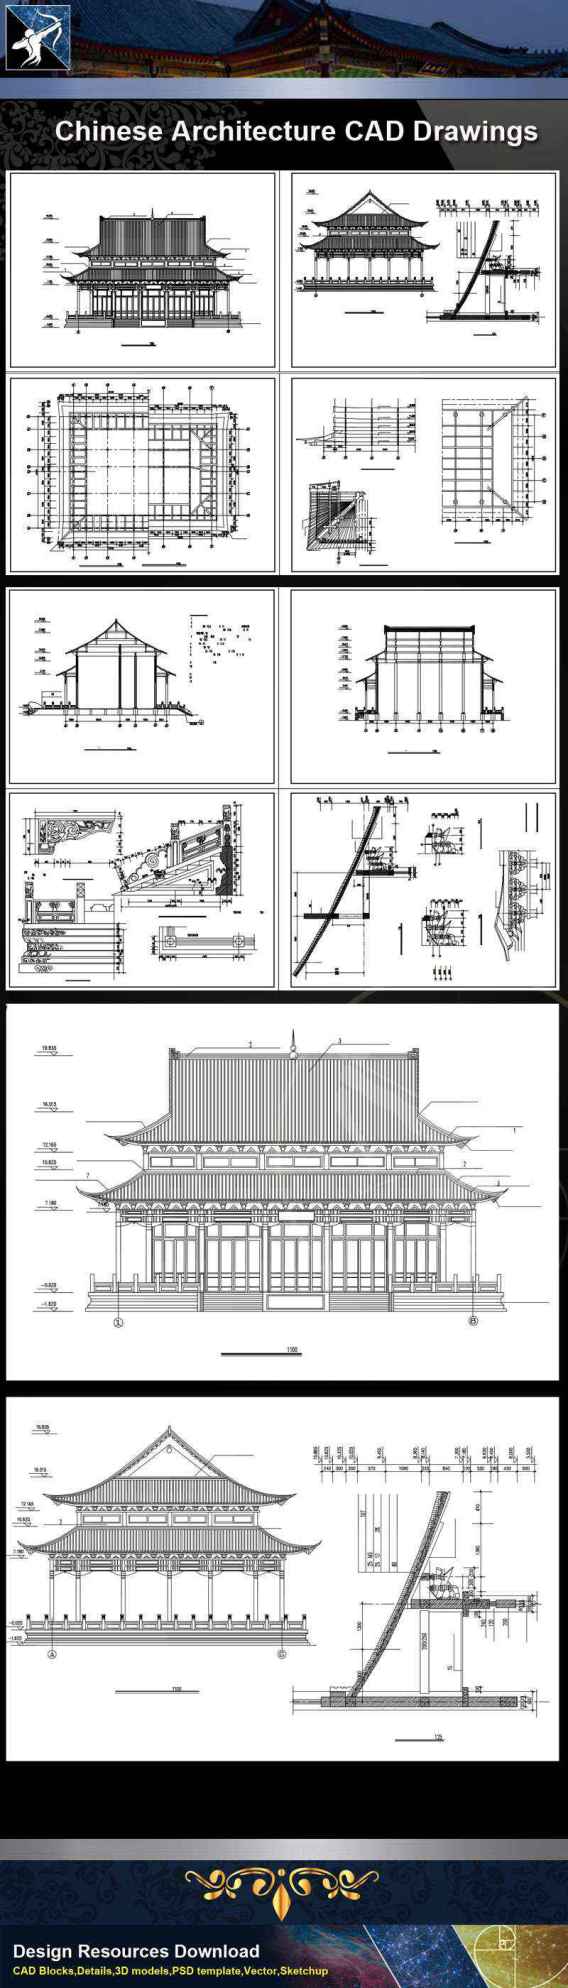 ★【Chinese Architecture CAD Drawings】@Grand Hall -Chinese Temple Drawings,CAD Details,Elevation